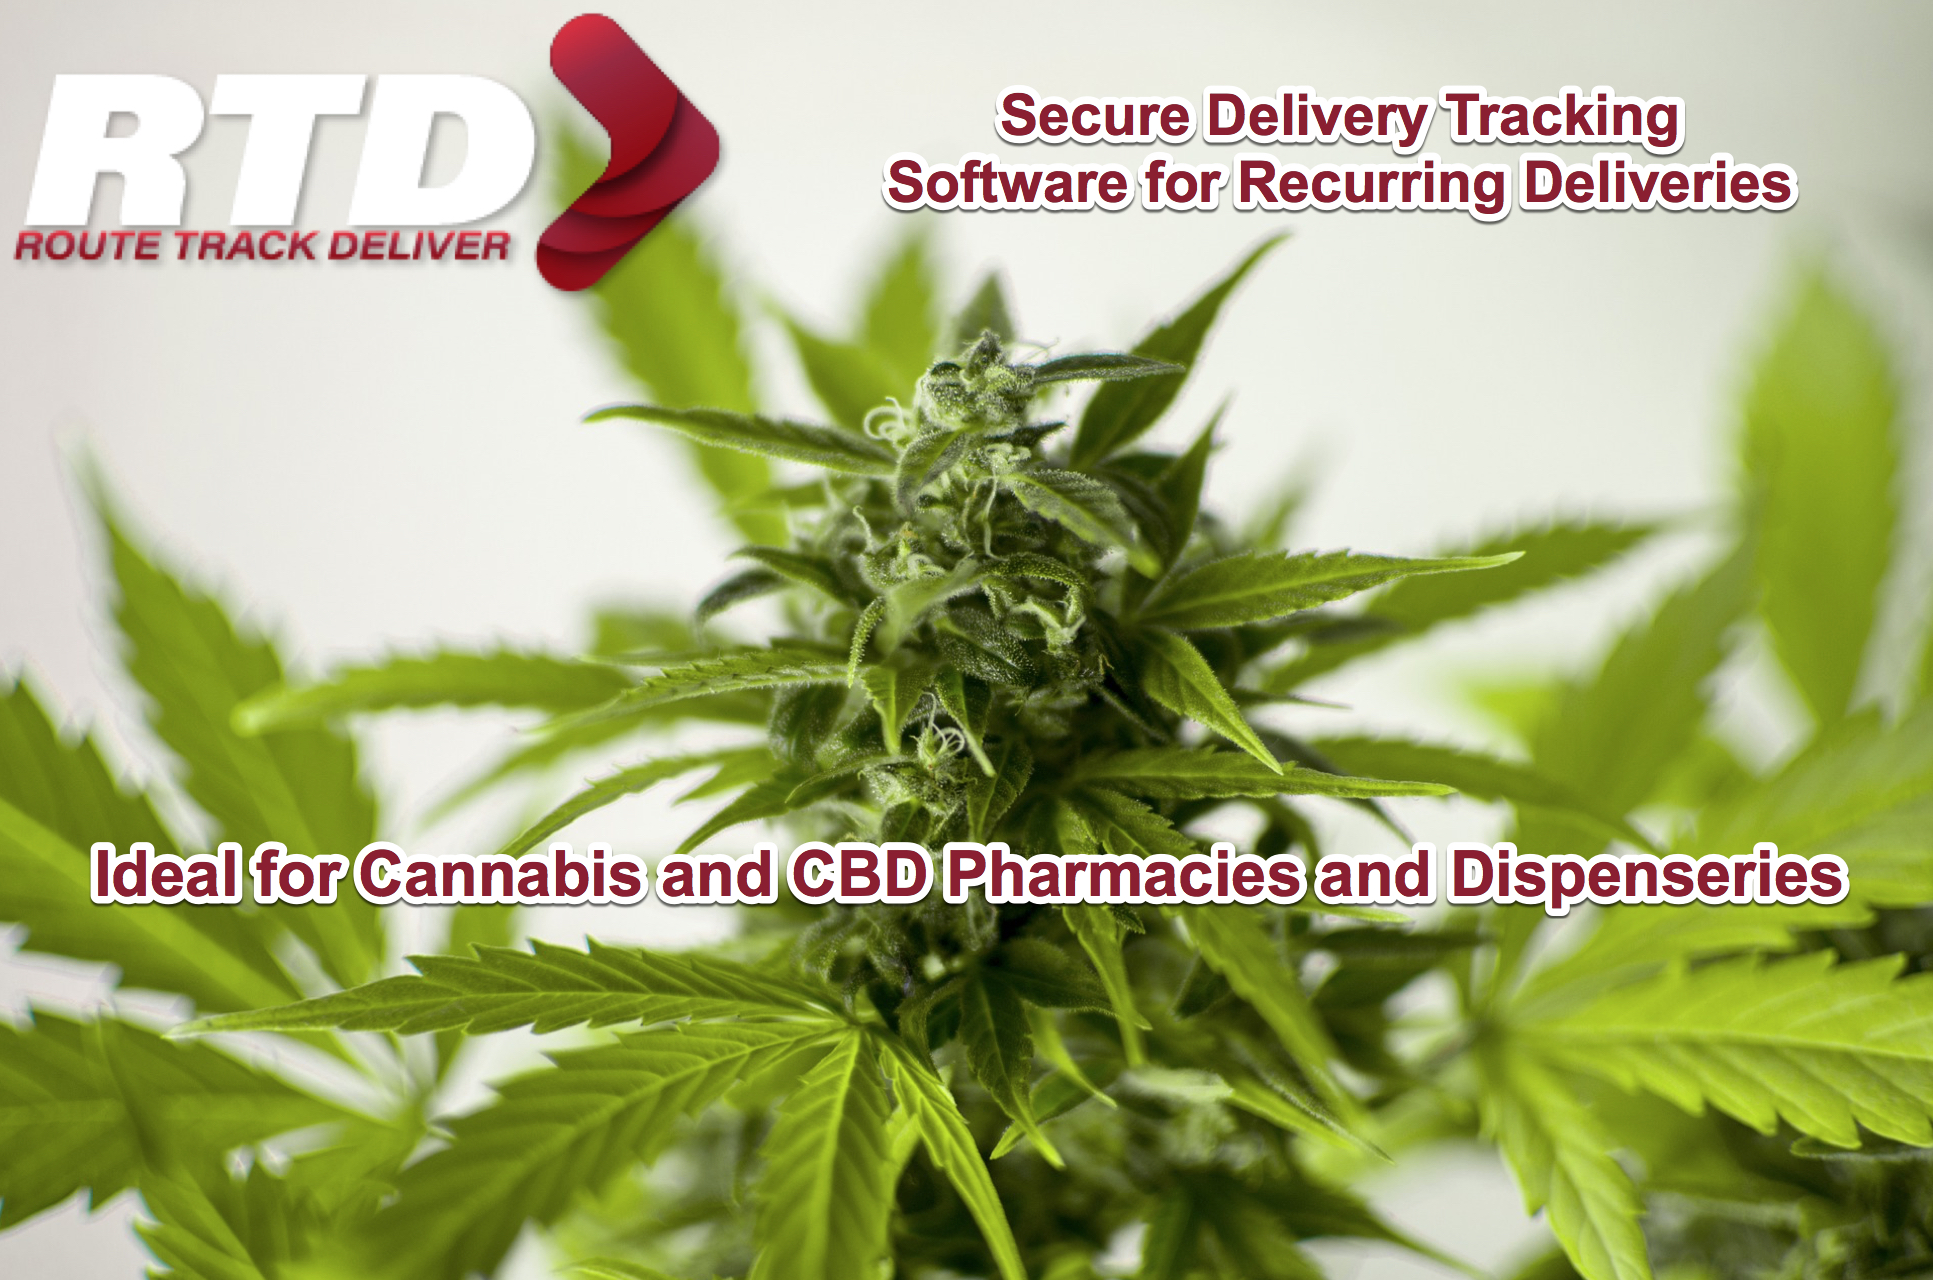 Cannabis and CBD Delivery Service Software Image